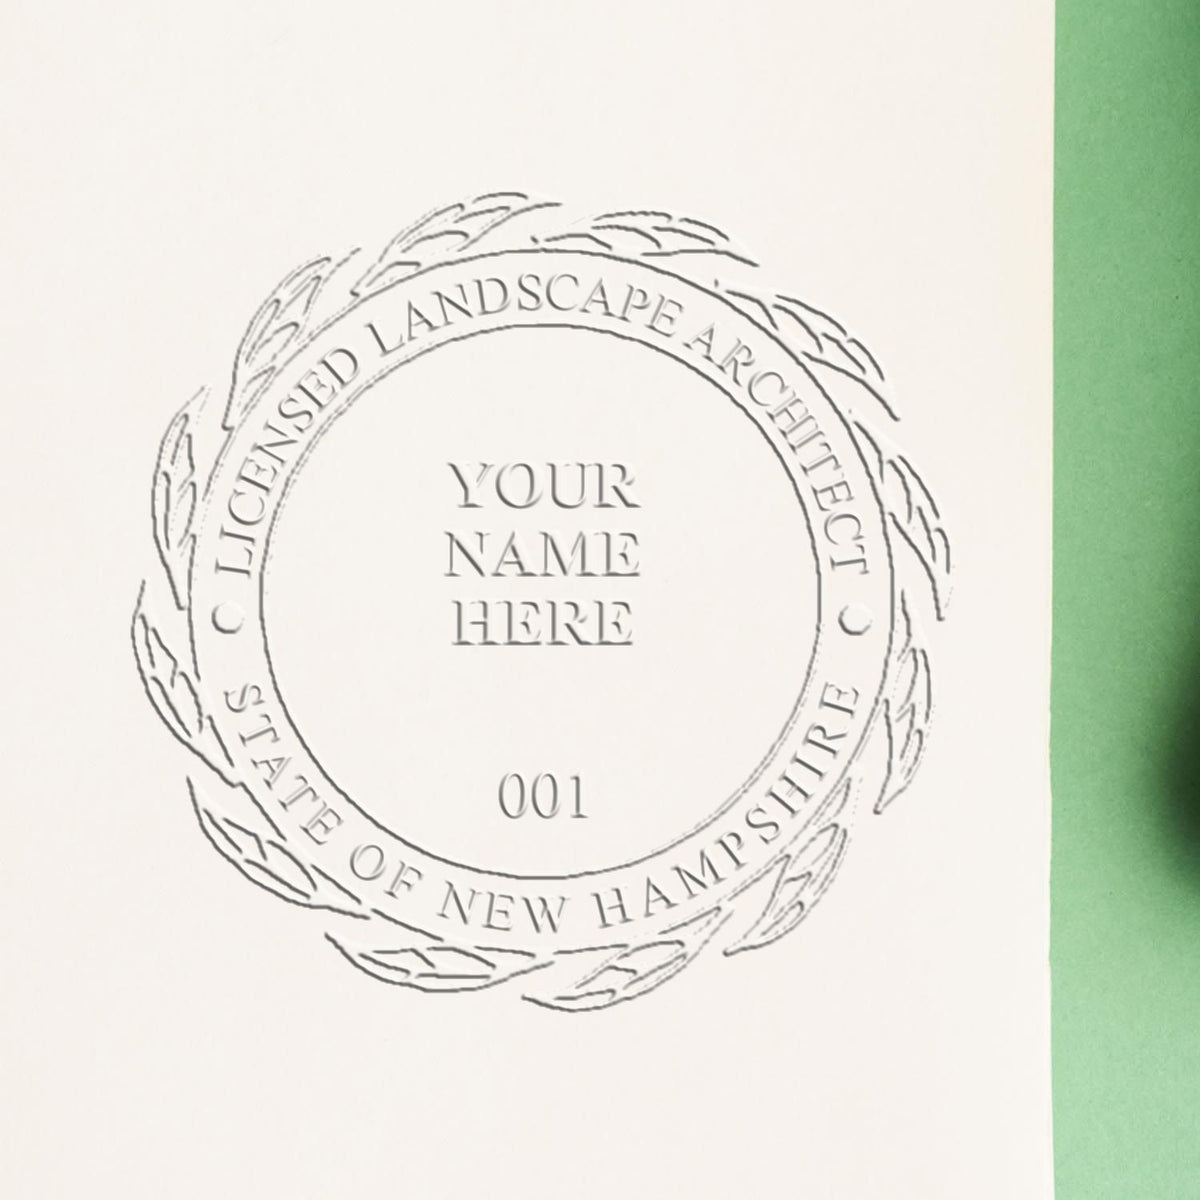 An in use photo of the Hybrid New Hampshire Landscape Architect Seal showing a sample imprint on a cardstock